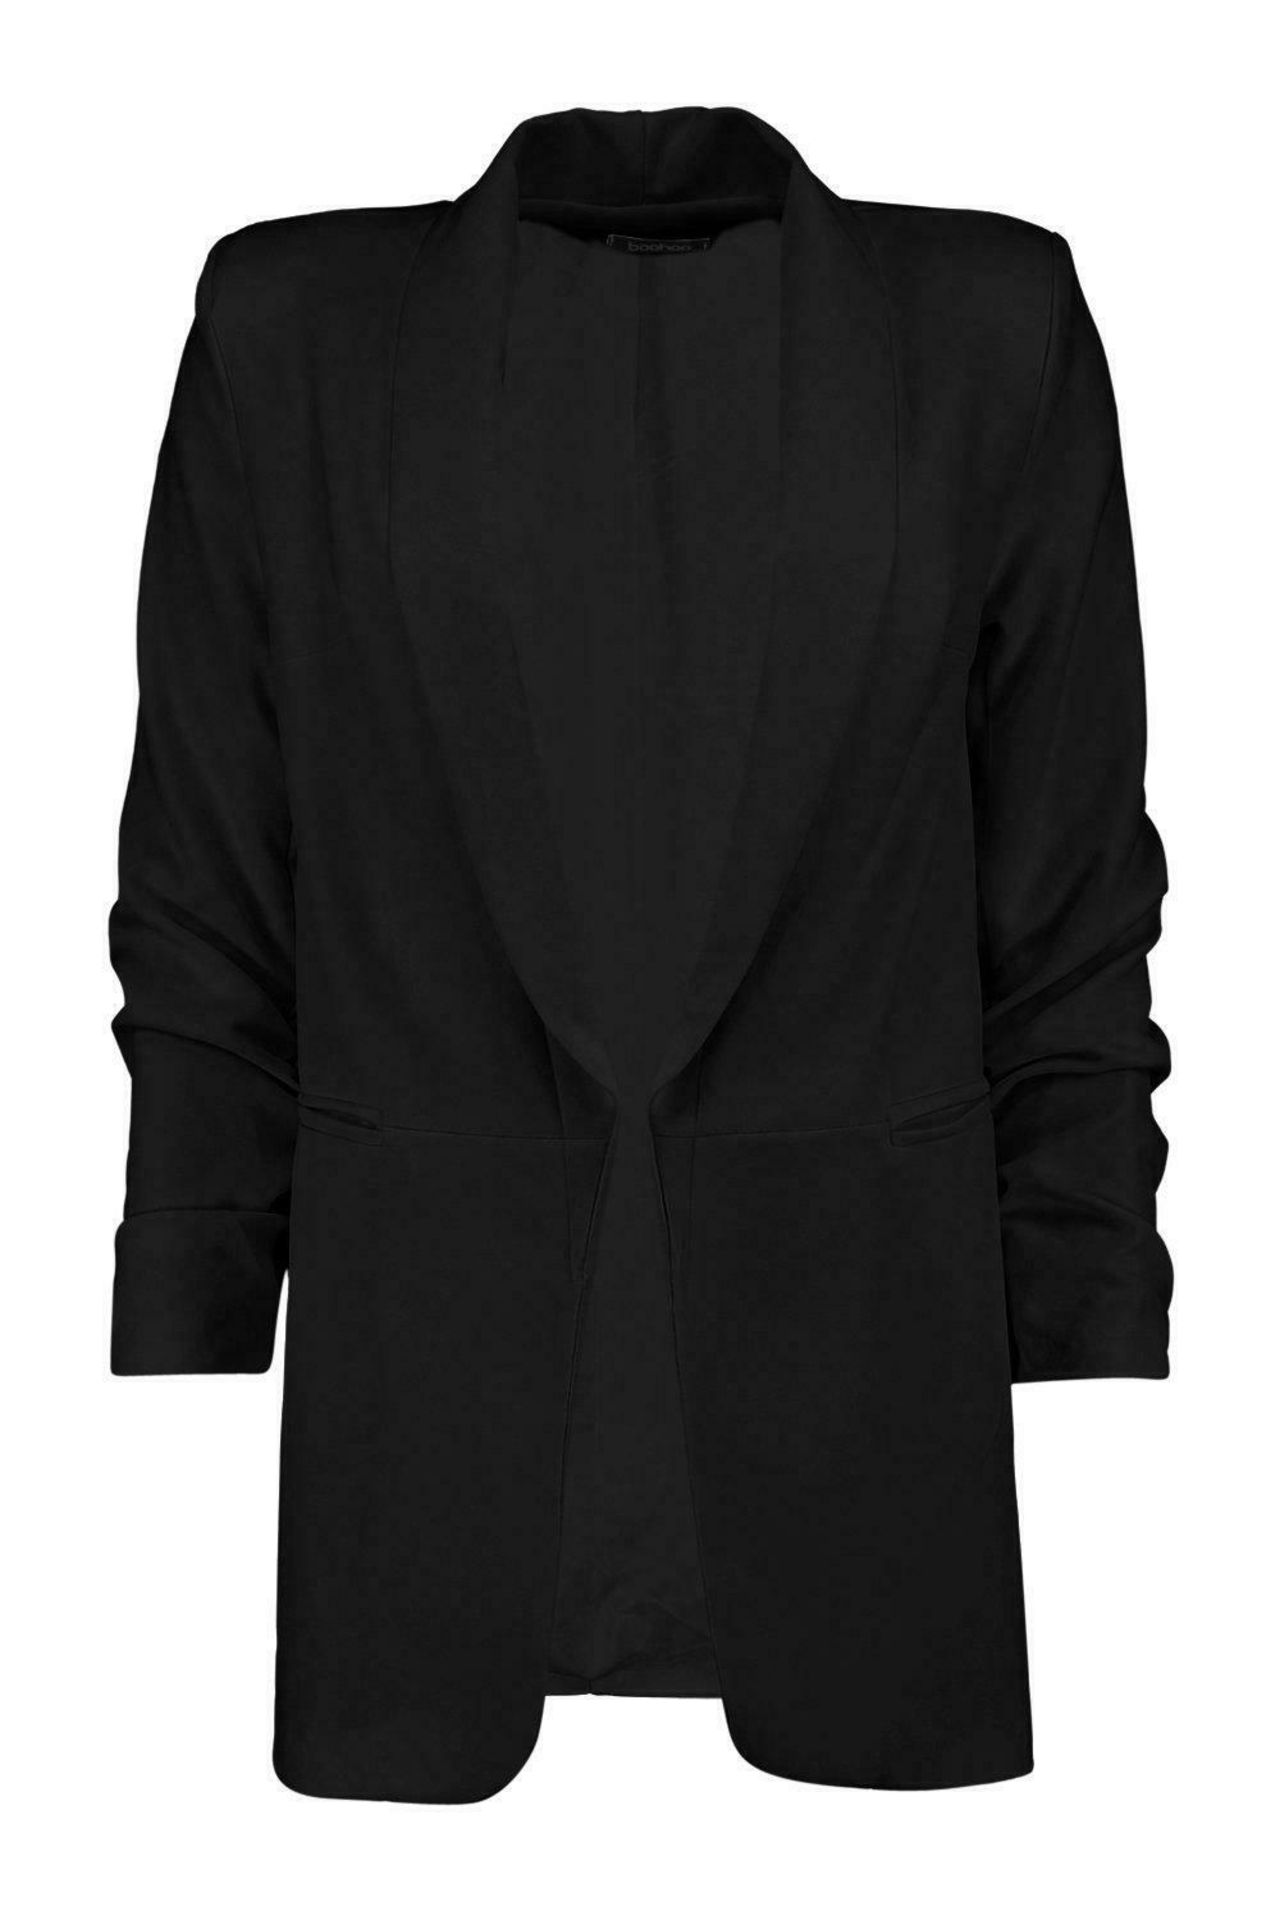 JOB LOT 18 Boohoo Ruched Sleeve Blazer Black Size 10 RRP £30 EACH - Image 2 of 2